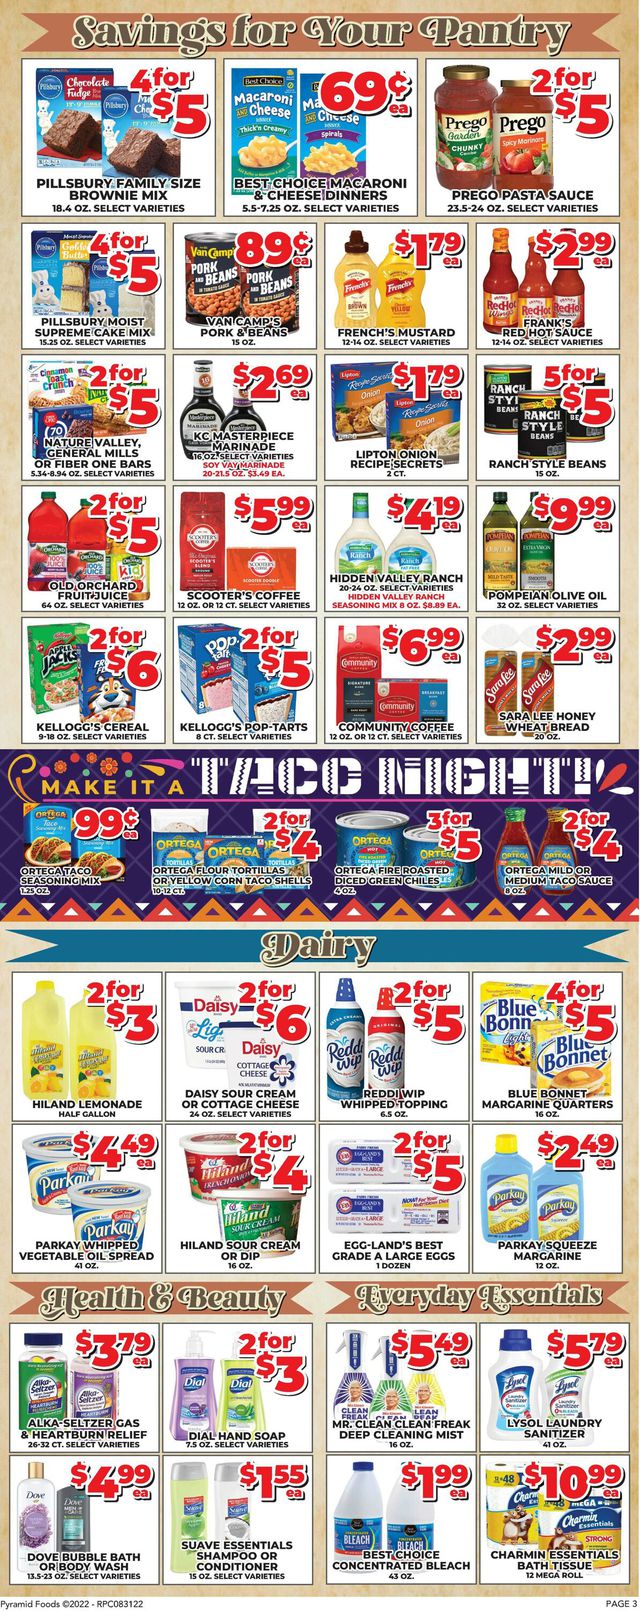 Price Cutter Ad from 08/31/2022